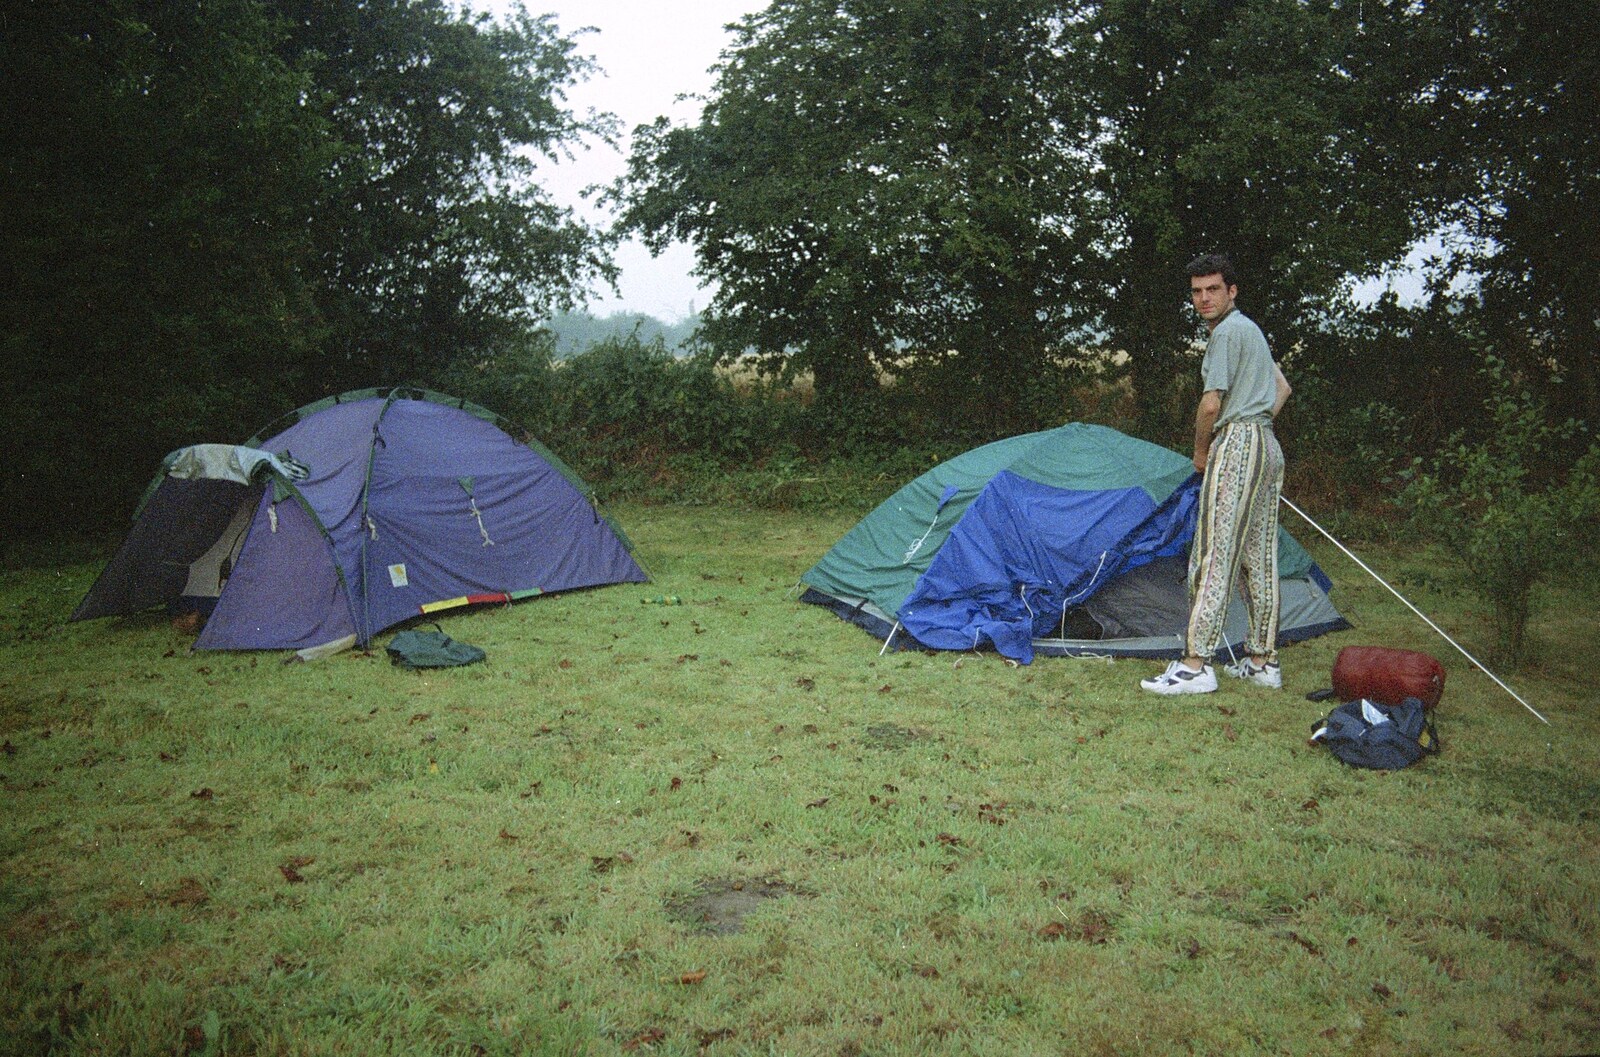 More garden tents from Bromestock 1 and a Mortlock Barbeque, Brome and Thrandeston, Suffolk - 24th June 1997